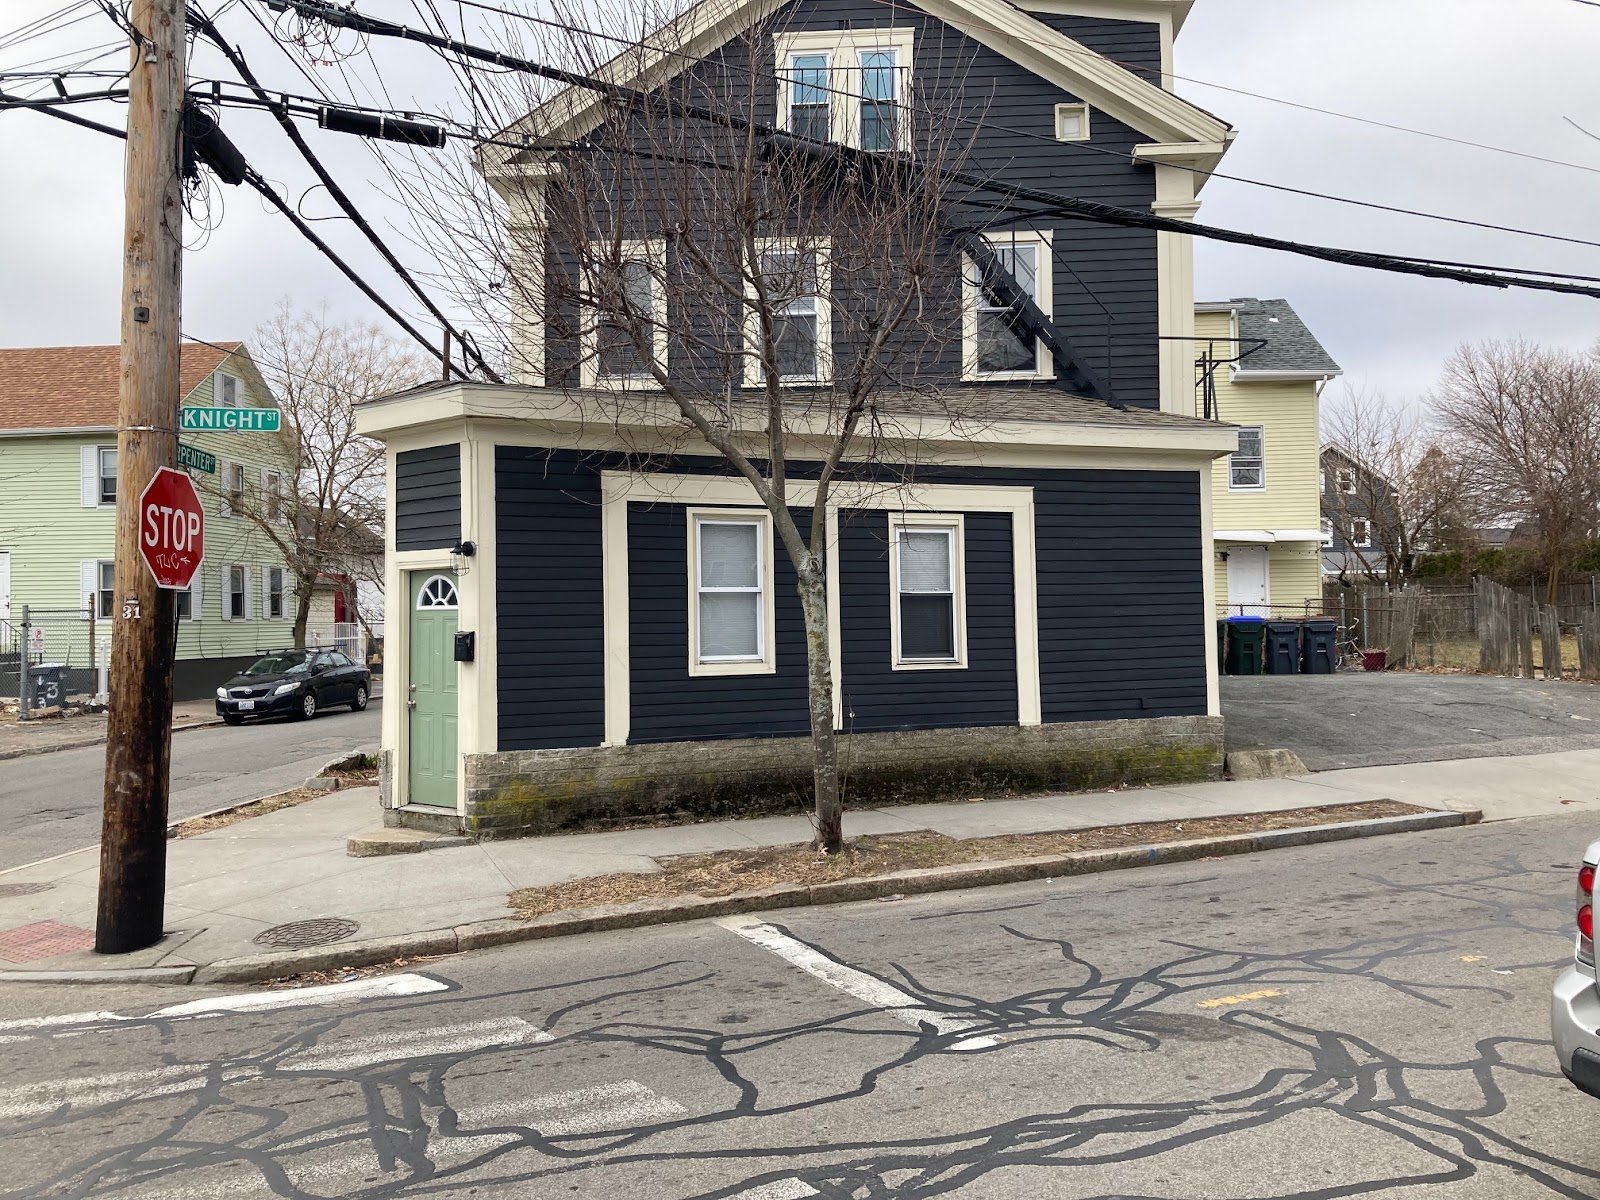  This house had a corner store added on at the first floor, since converted into an apartment. The original storefront windows have been infilled and smaller residential windows were installed. 